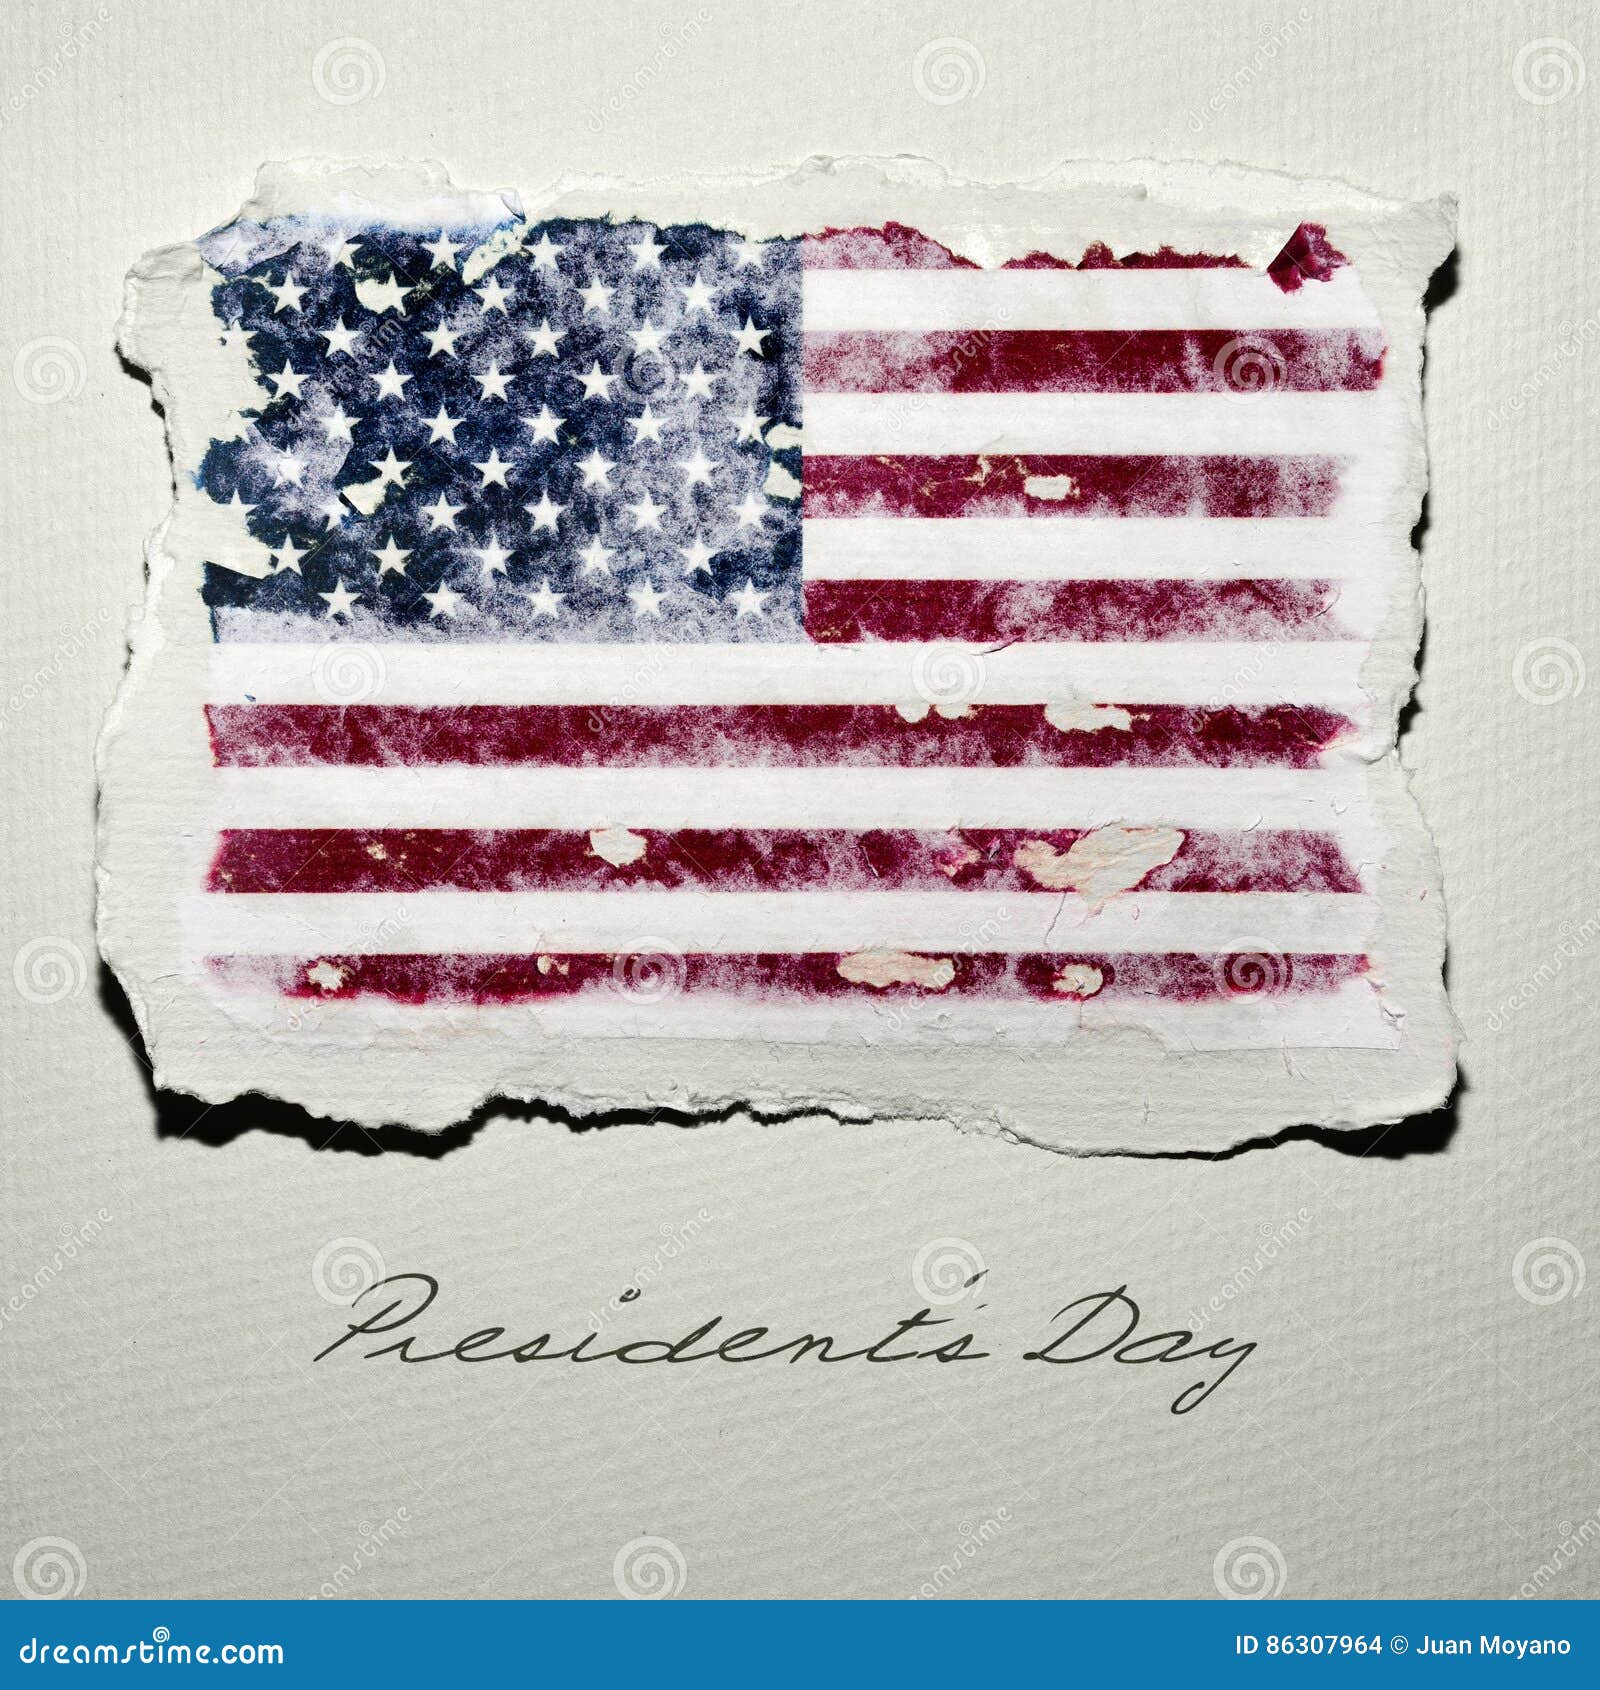 flag of the us and text presidents day